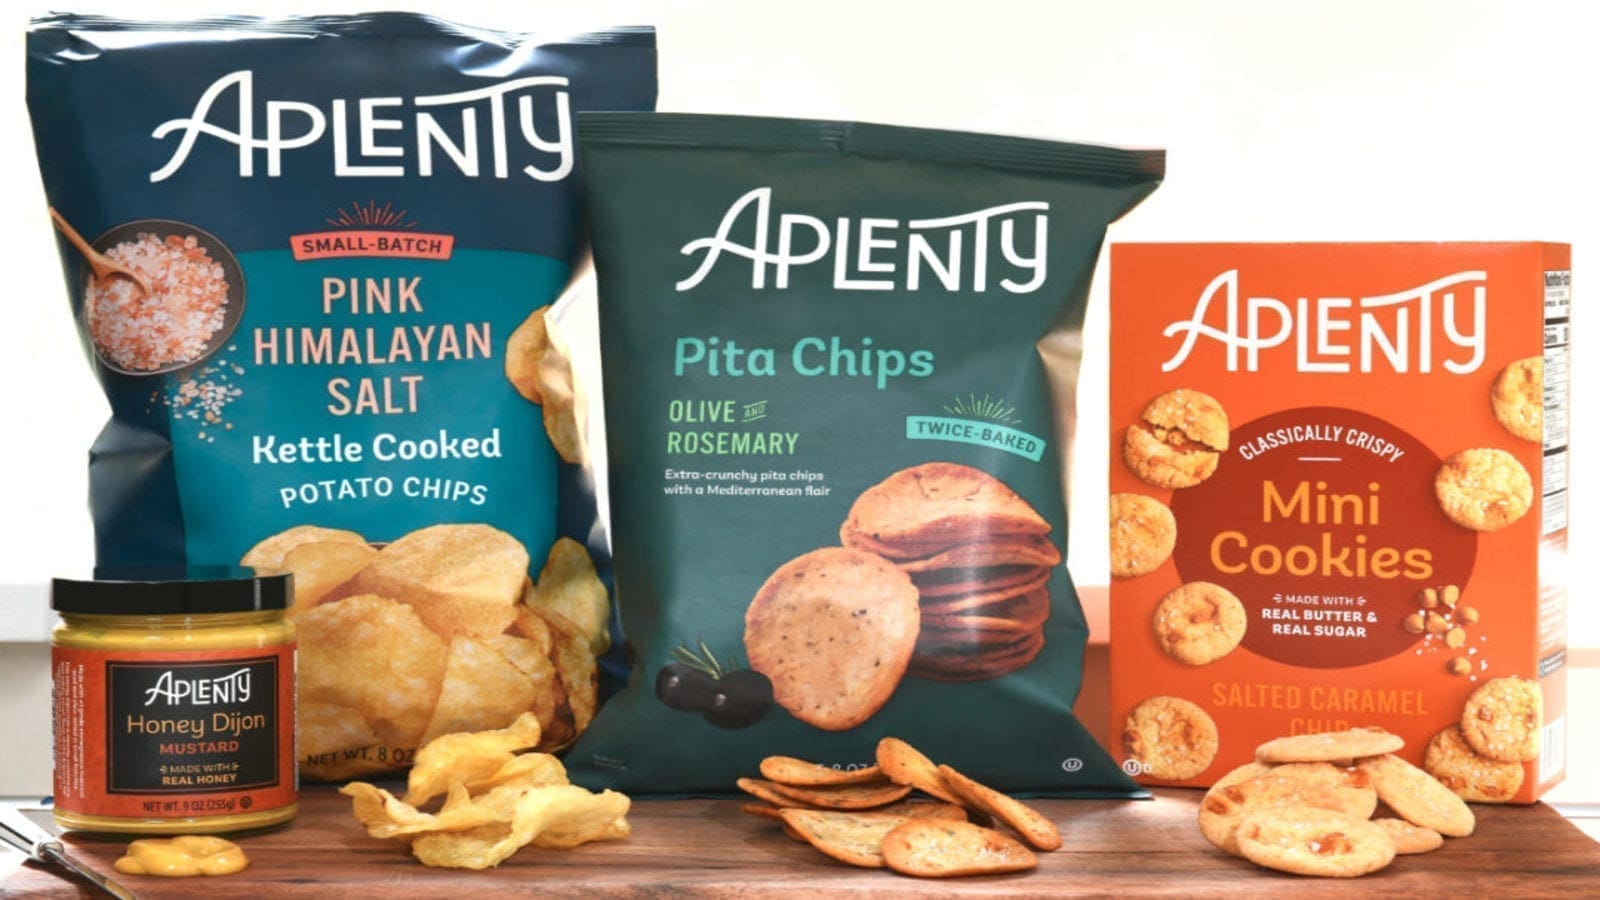 Amazon introduces Aplenty private label line, opens third UK grocery store